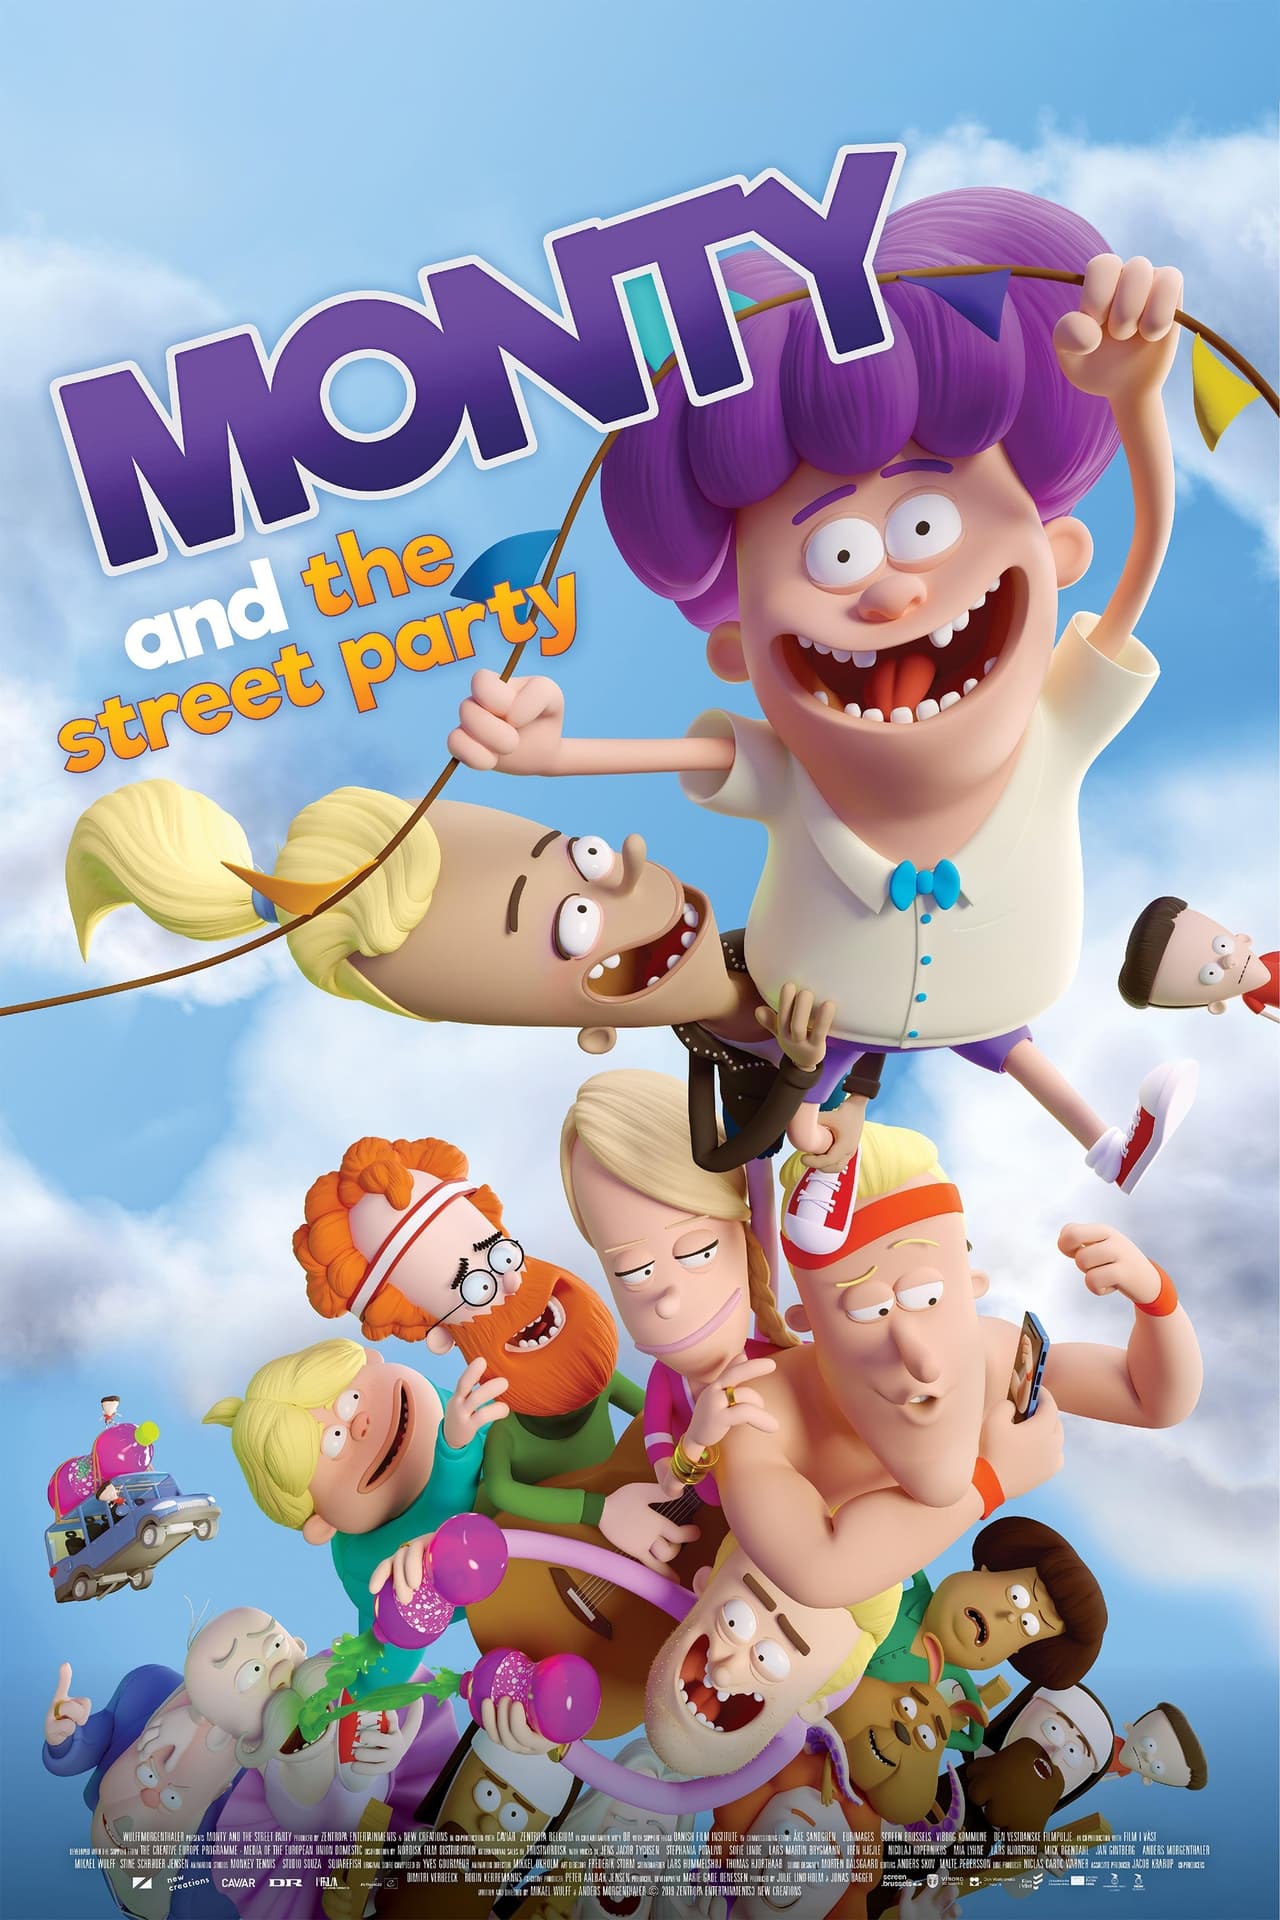 Monty and the Street Party (2019) 192Kbps 24Fps 48Khz 2.0Ch DigitalTV Turkish Audio TAC